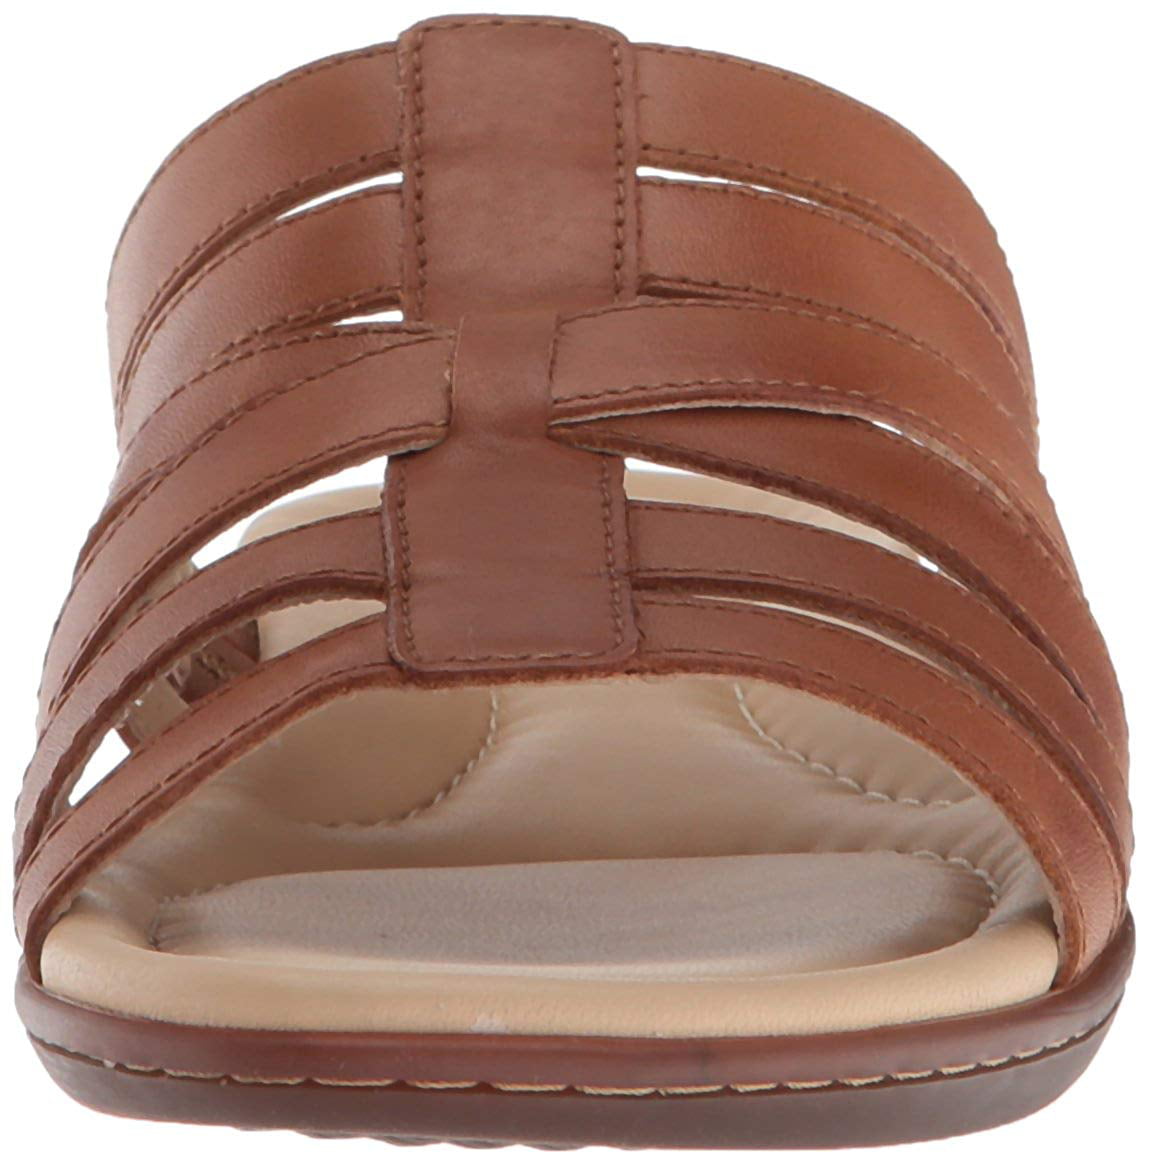 Hush Puppies Womens Dachshund Leather Open Toe Casual Slide Sandals